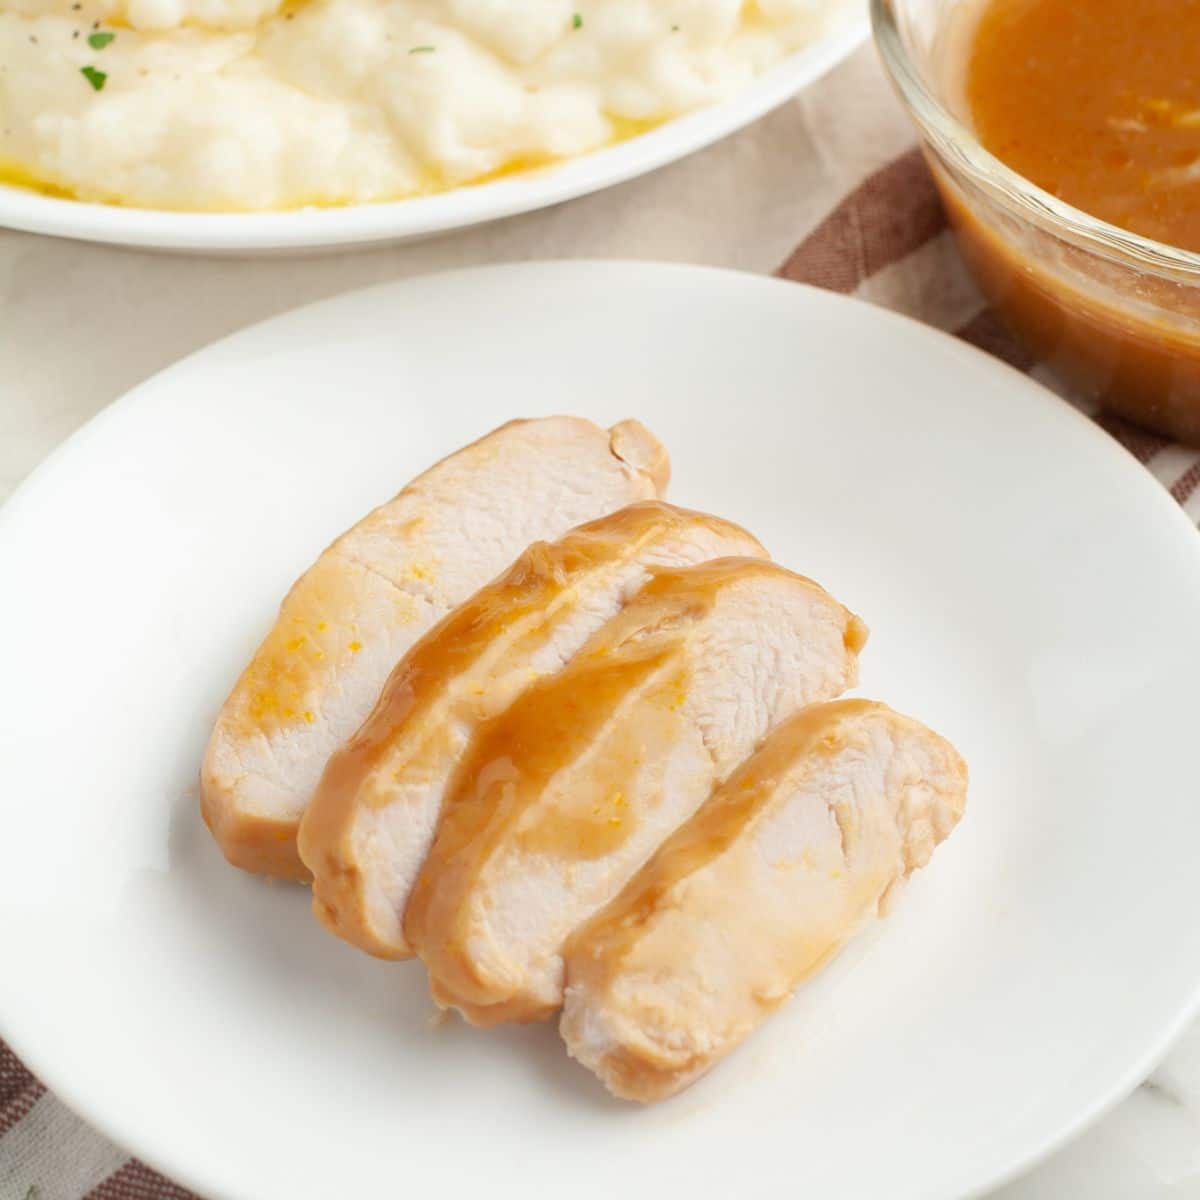 Sliced turkey on a plate with gravy.